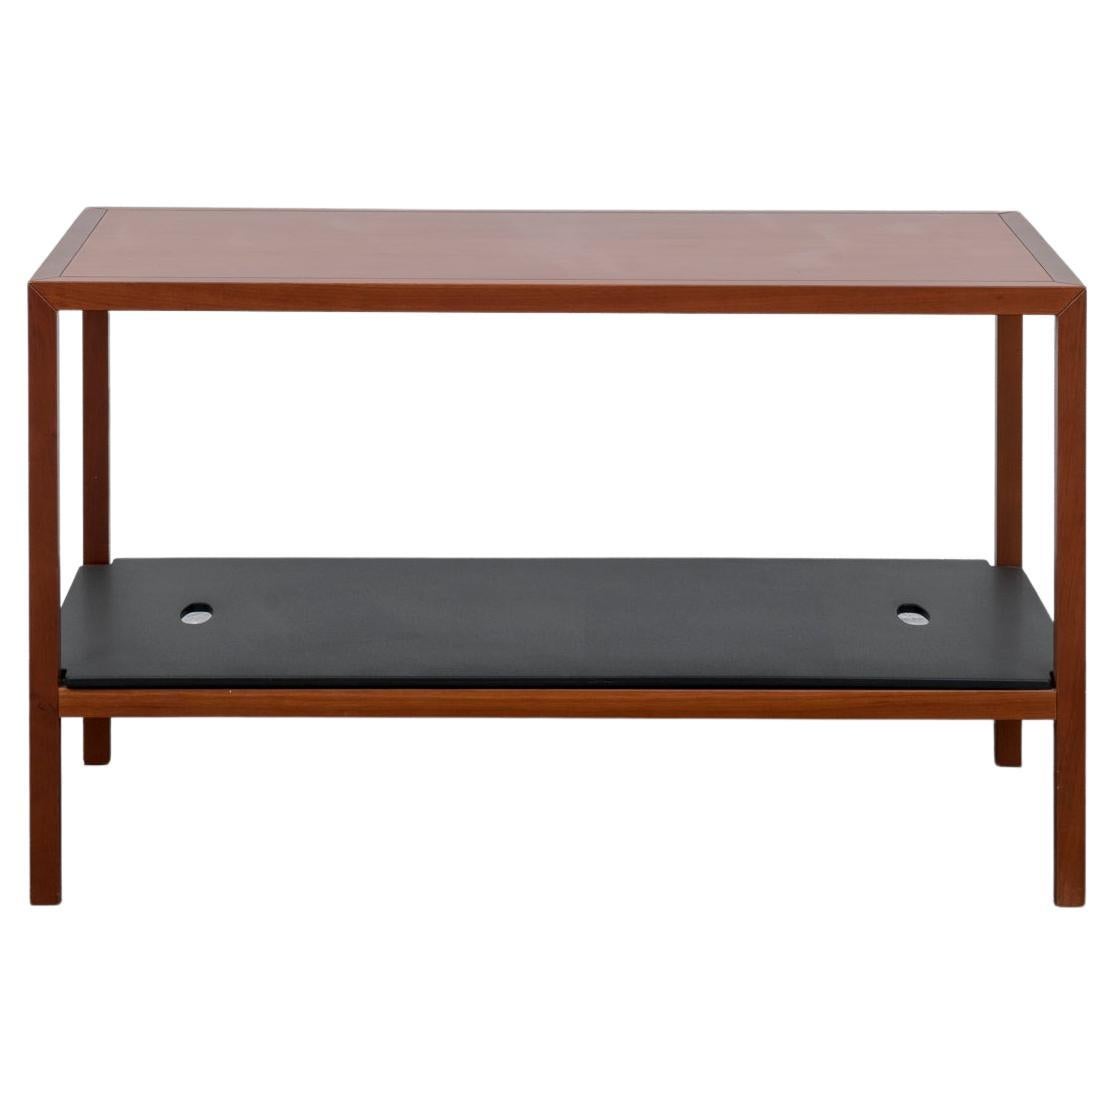 “Spigolino 3” Cherry Side Table with Removable Tray by Vico Magistretti for Flou For Sale